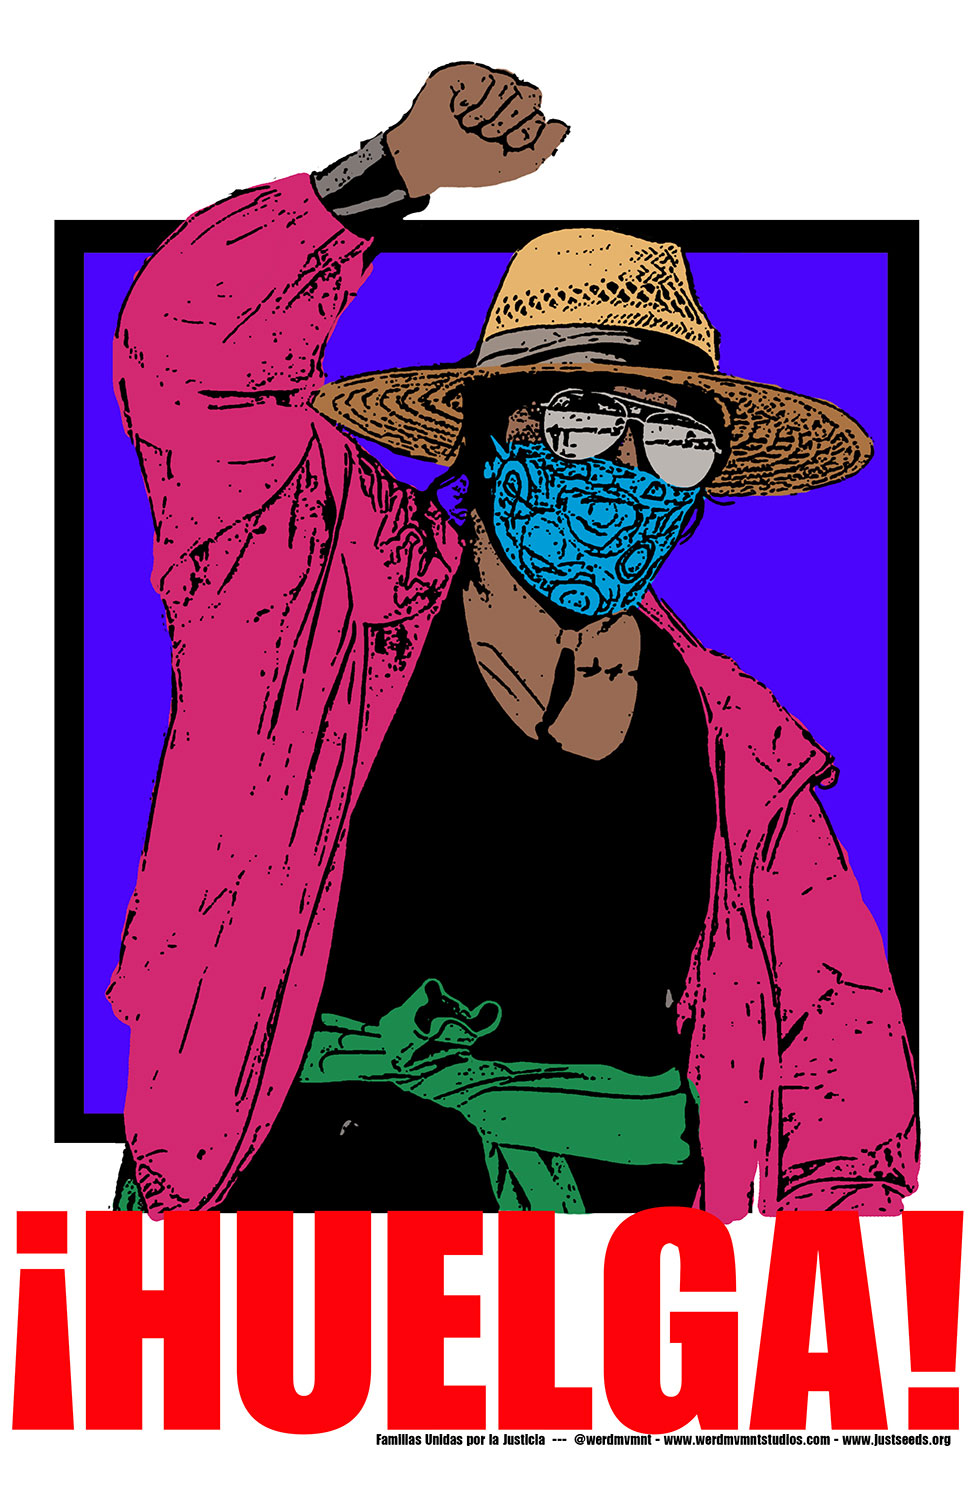 An activist poster with a woman in a straw hat and her fist raised, and the caption reads "¡Huelga!" (Strike!)